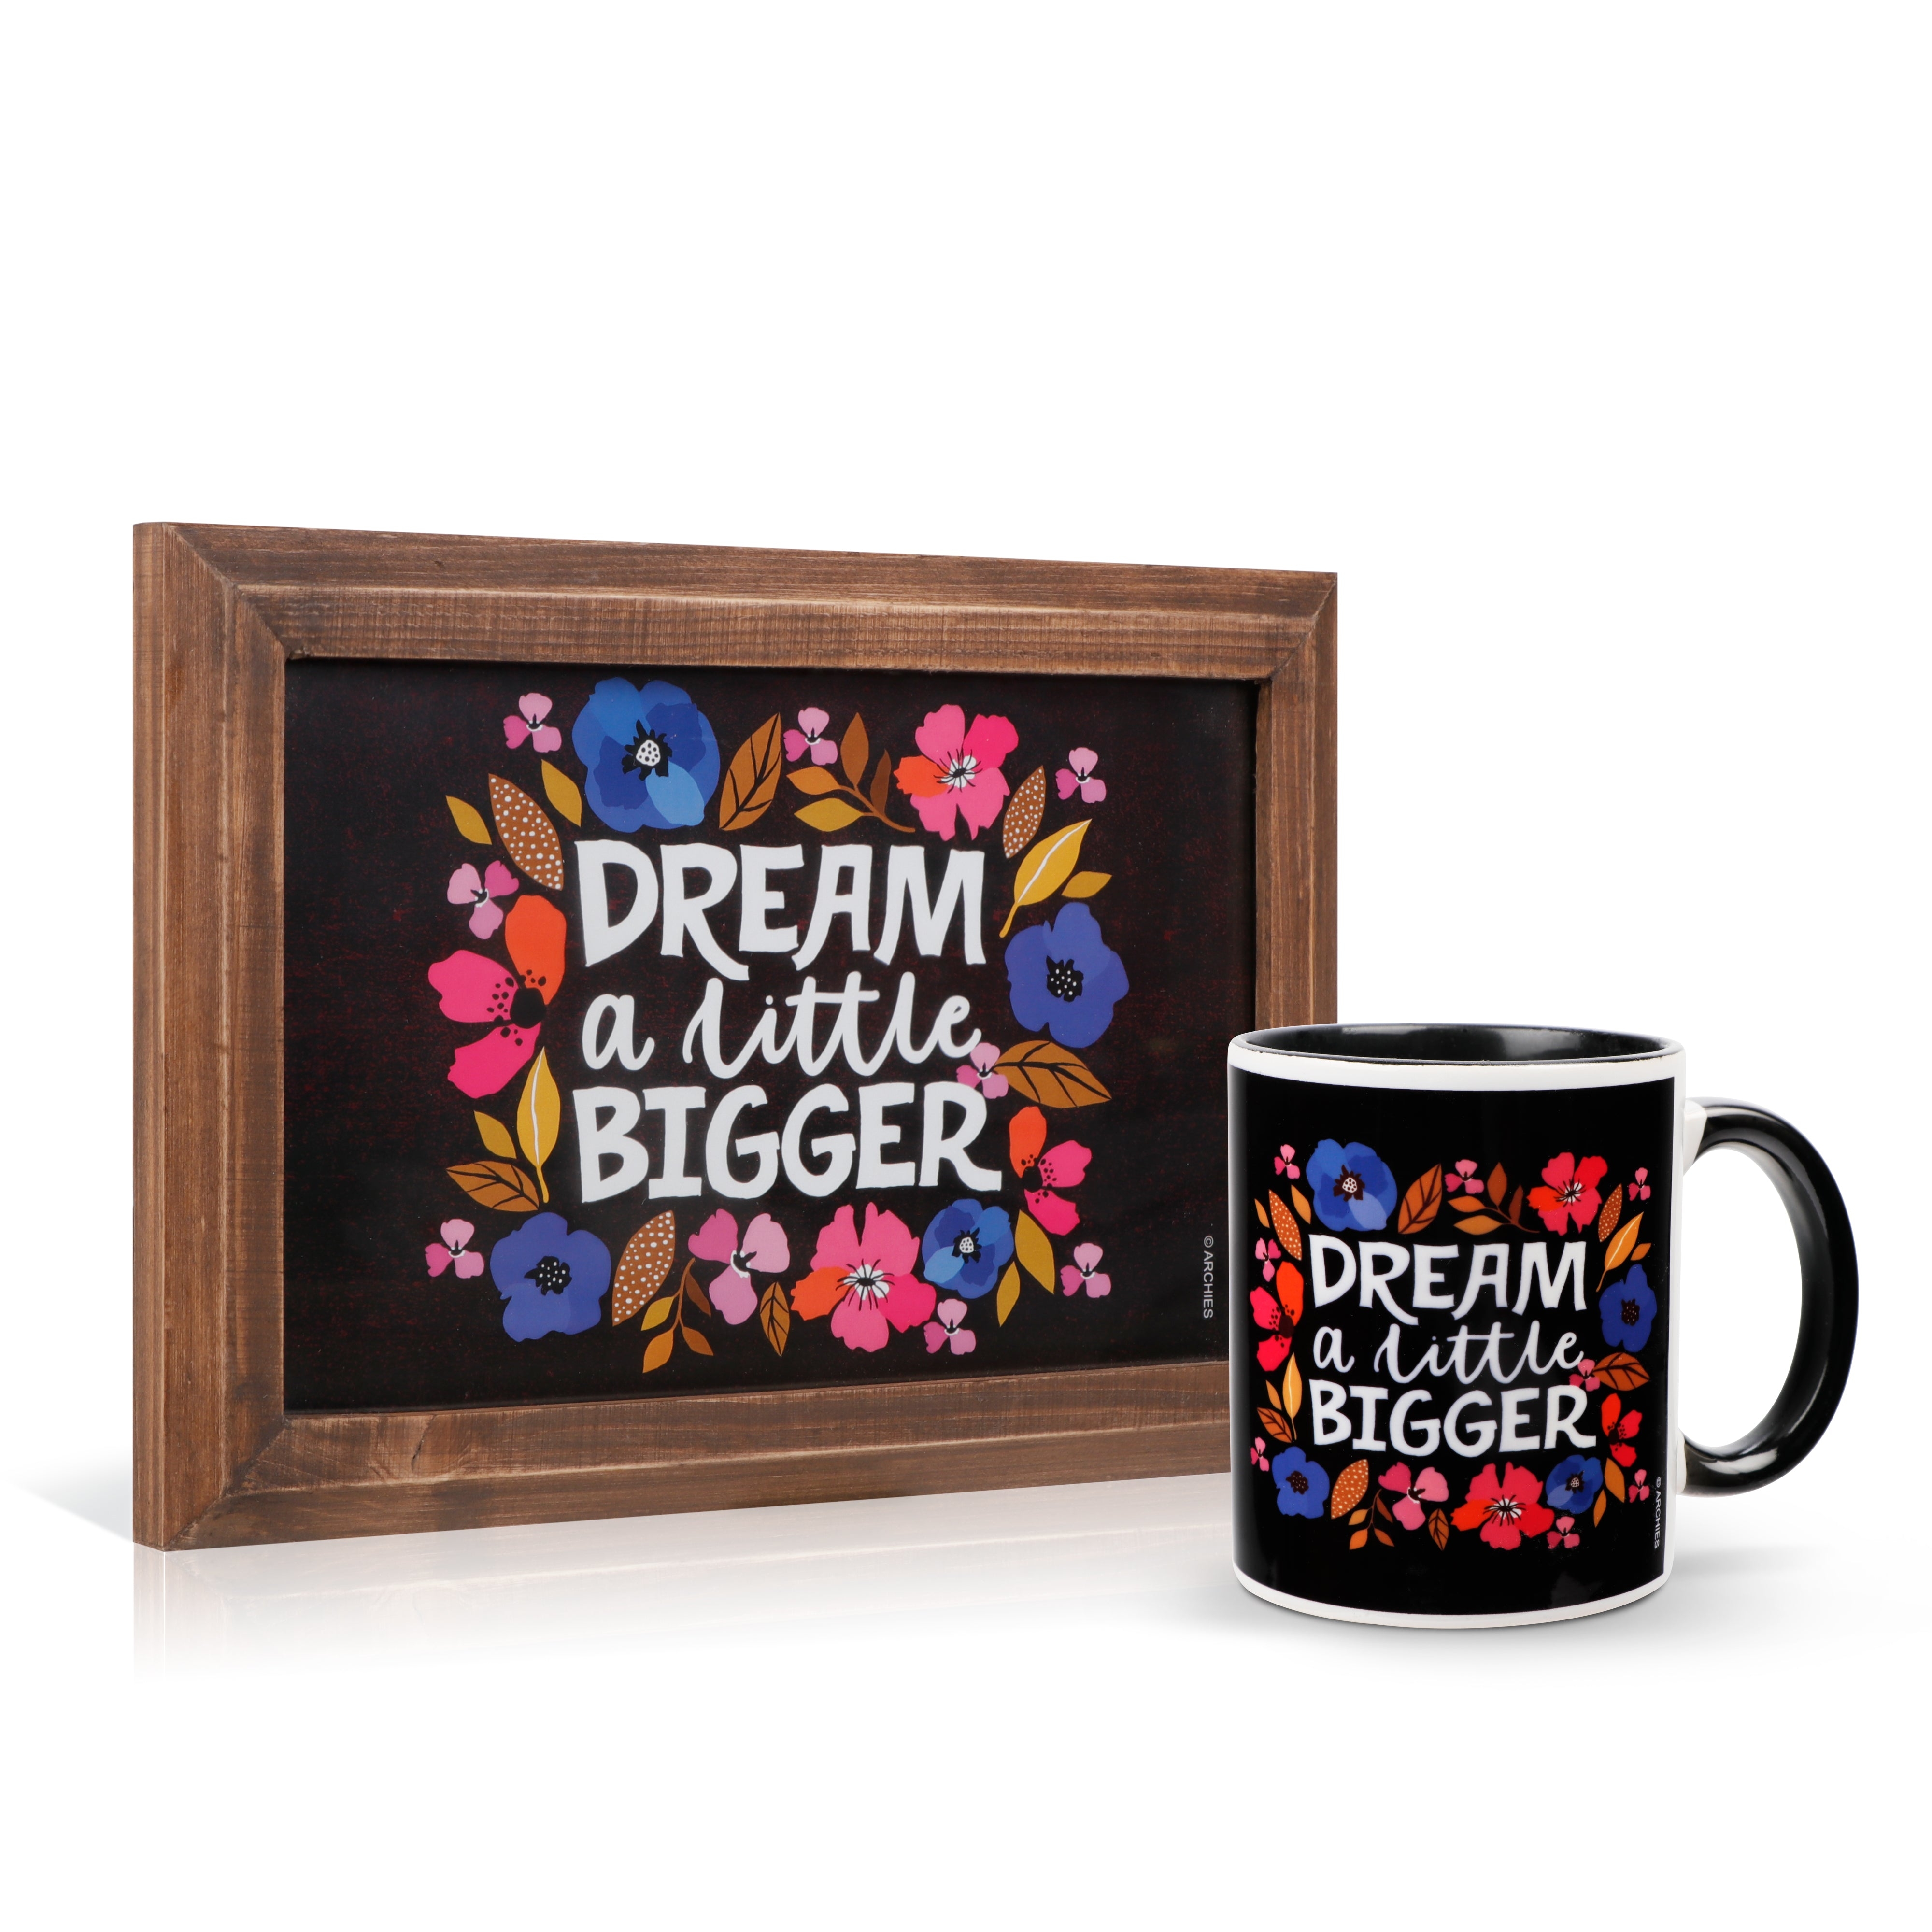 Archies | Archies KEEP SAKE Combo Gift with Ceramic Mug and Elevated Initial Quotatio- DREAM a little BIGGER